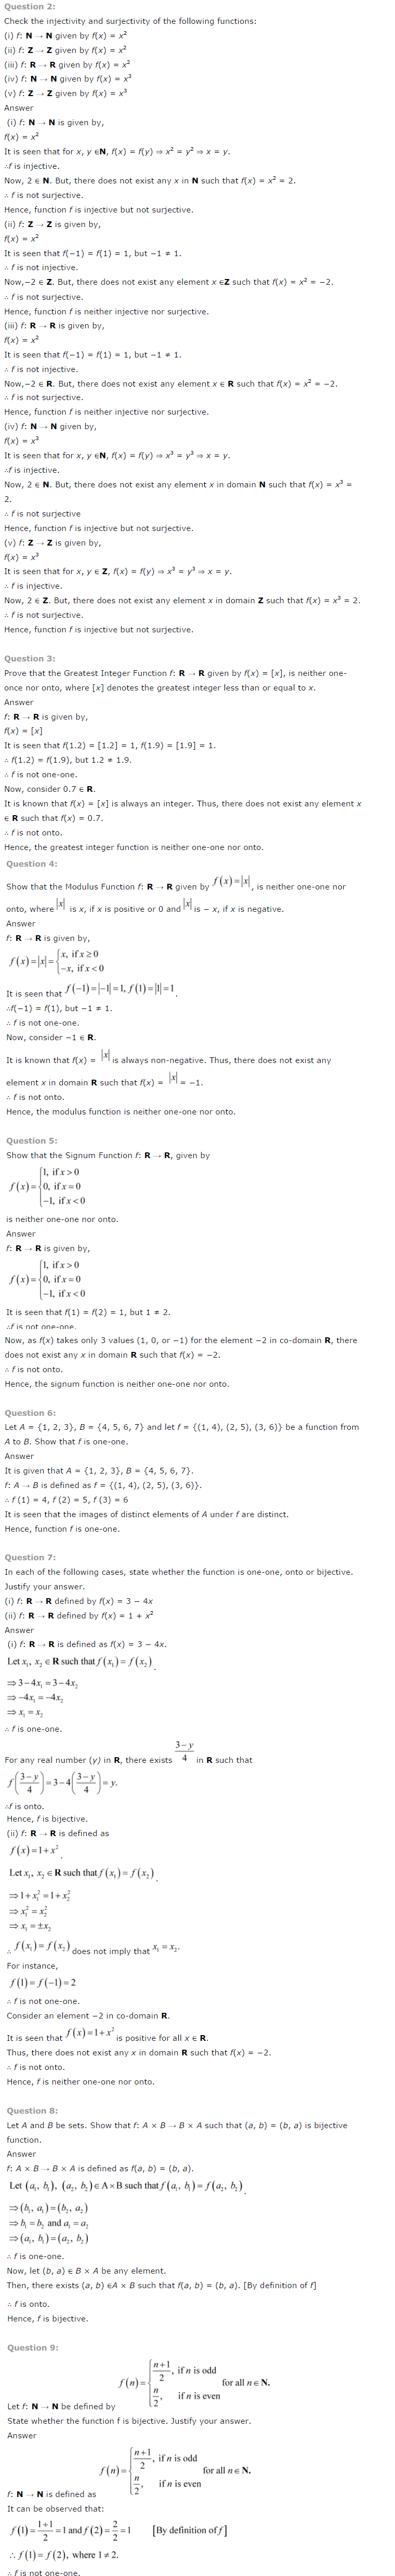 NCERT Solutions For Class 12 Maths Chapter 1 Relations and Functions-4